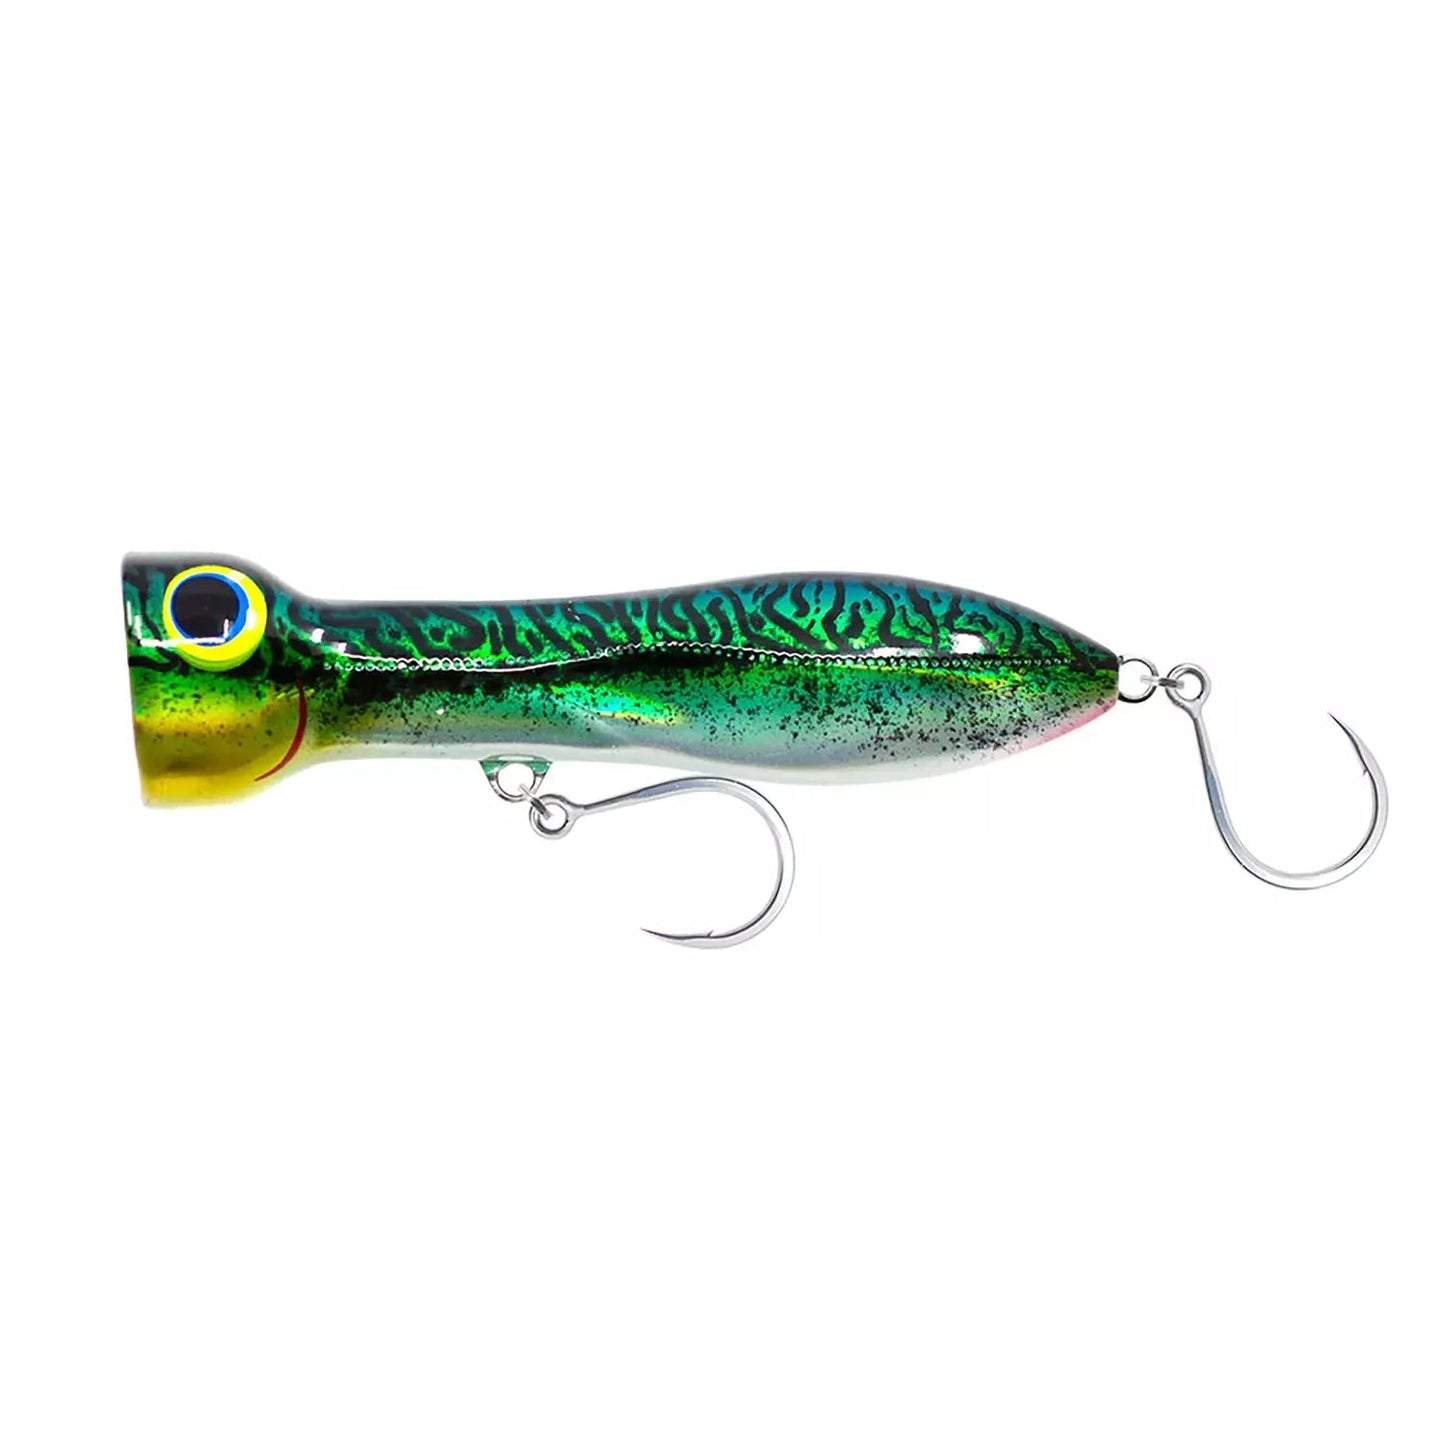 Nomad Design Chug Norris Popper-Lure - Poppers, Stickbaits & Pencils-Nomad-180mm-Silver Green Mackerel-Fishing Station